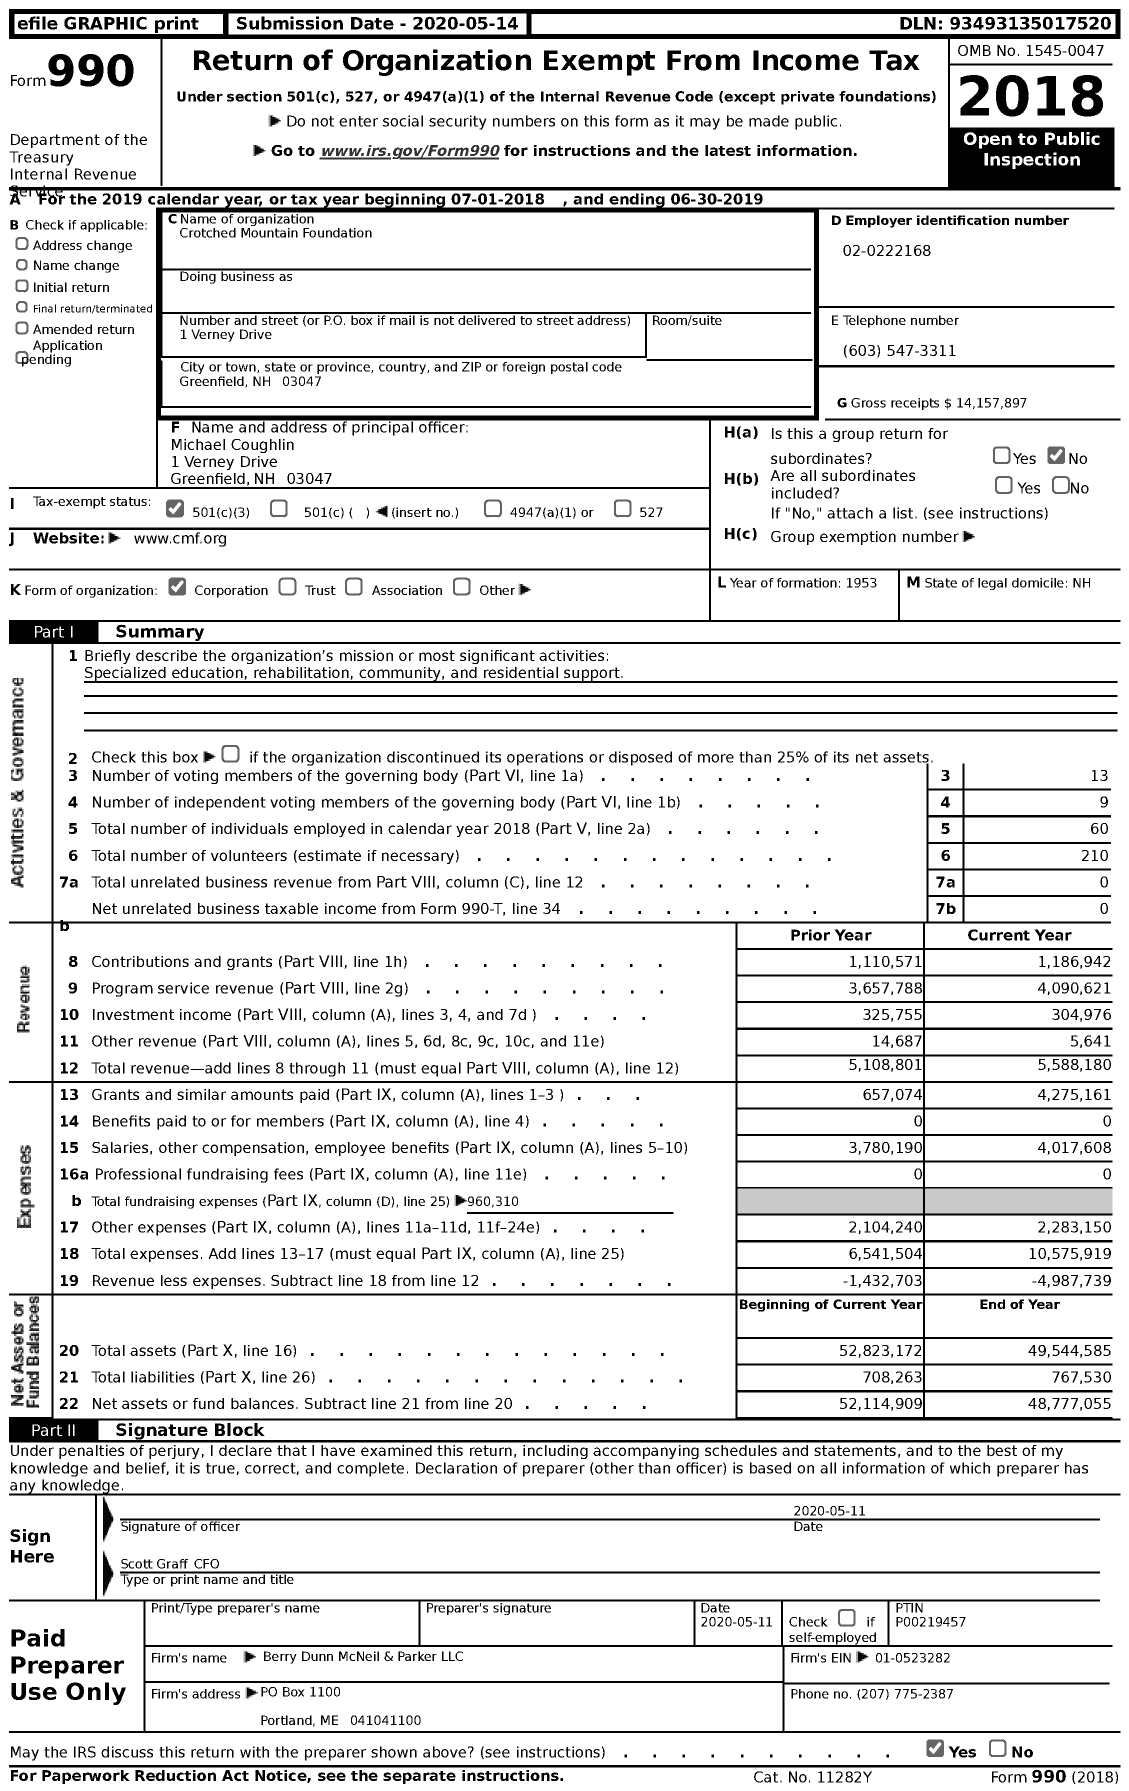 Image of first page of 2018 Form 990 for Crotched Mountain Foundation (CMF)